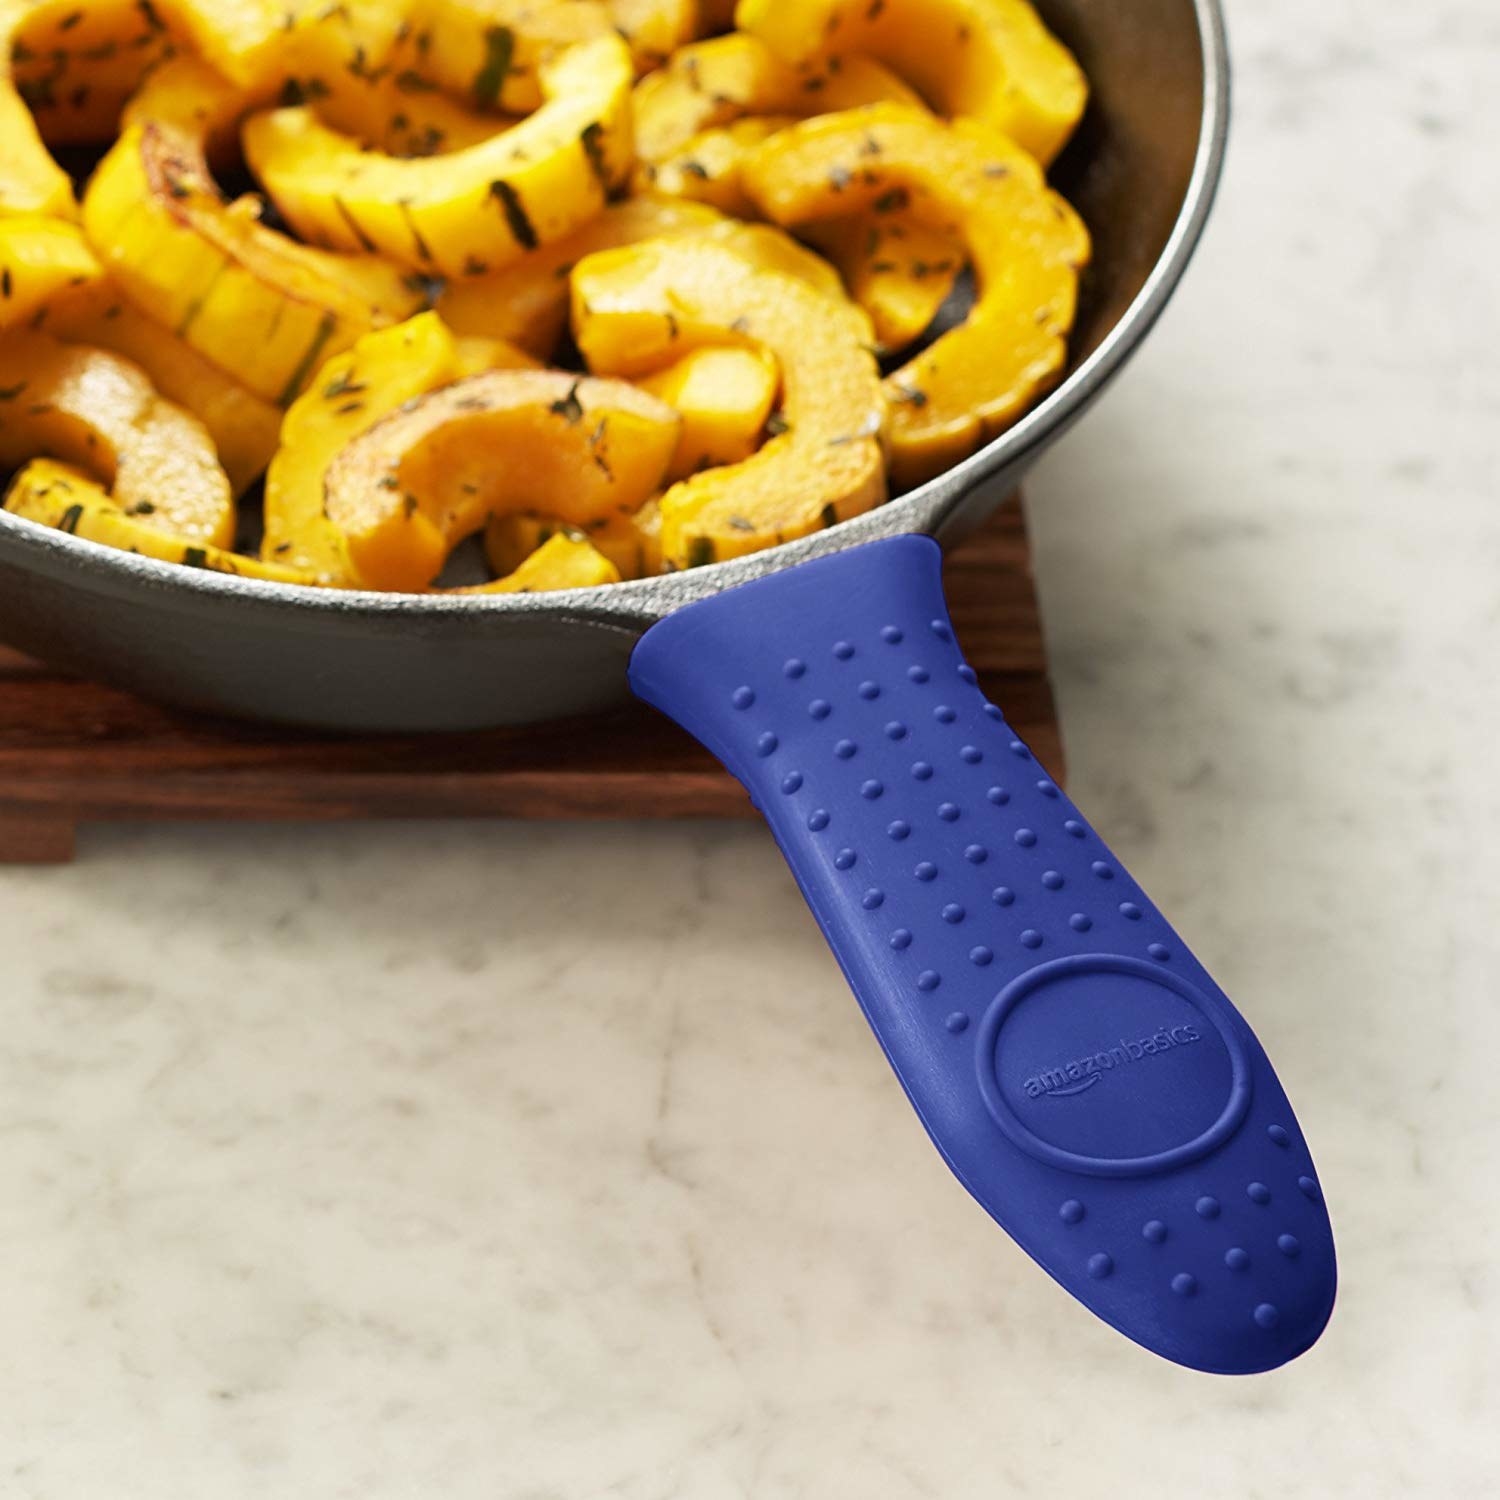 silicone cap in blue over skillet handle